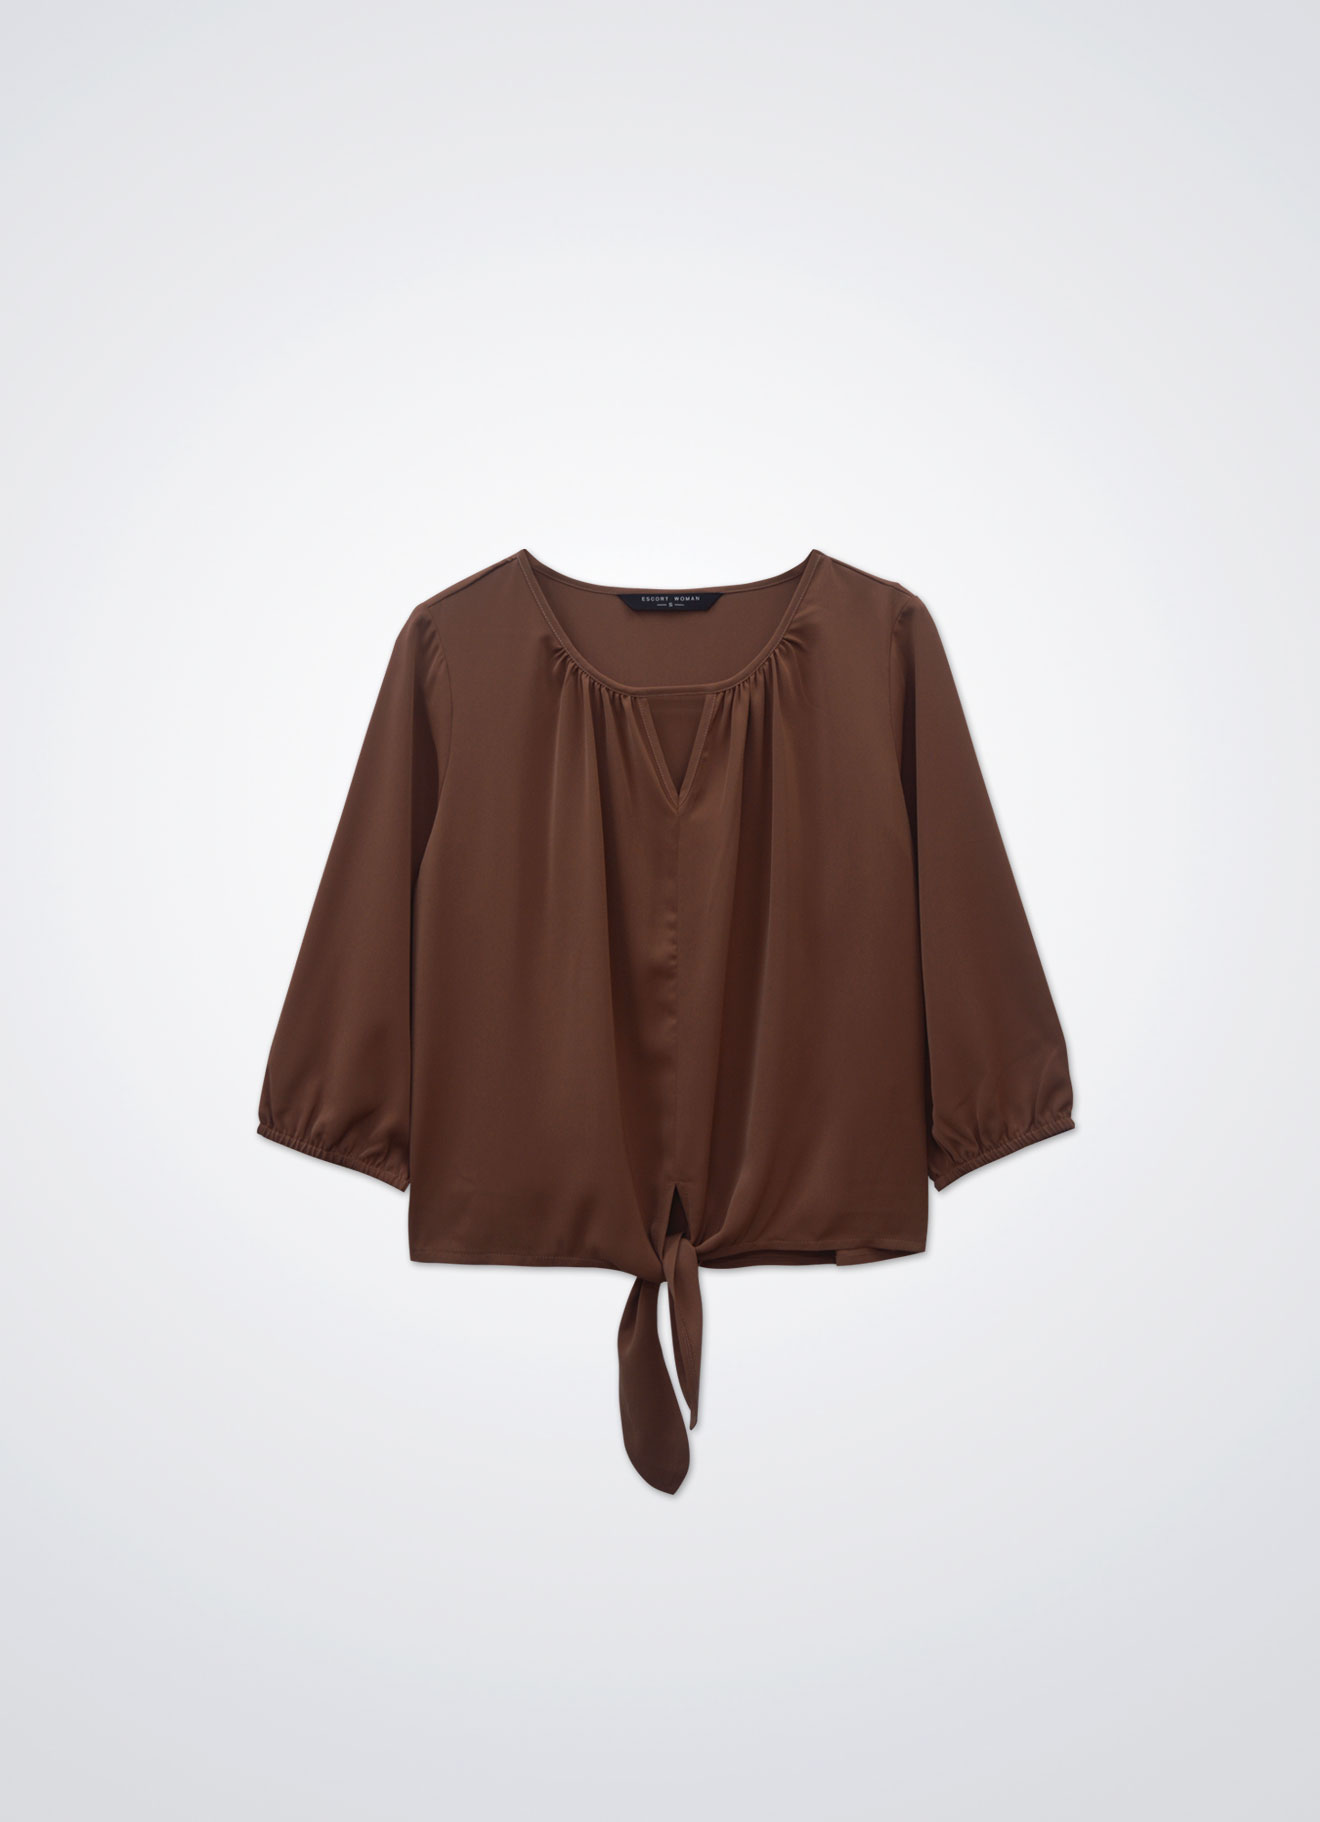 Mocha-Bisque by Sleeve Top